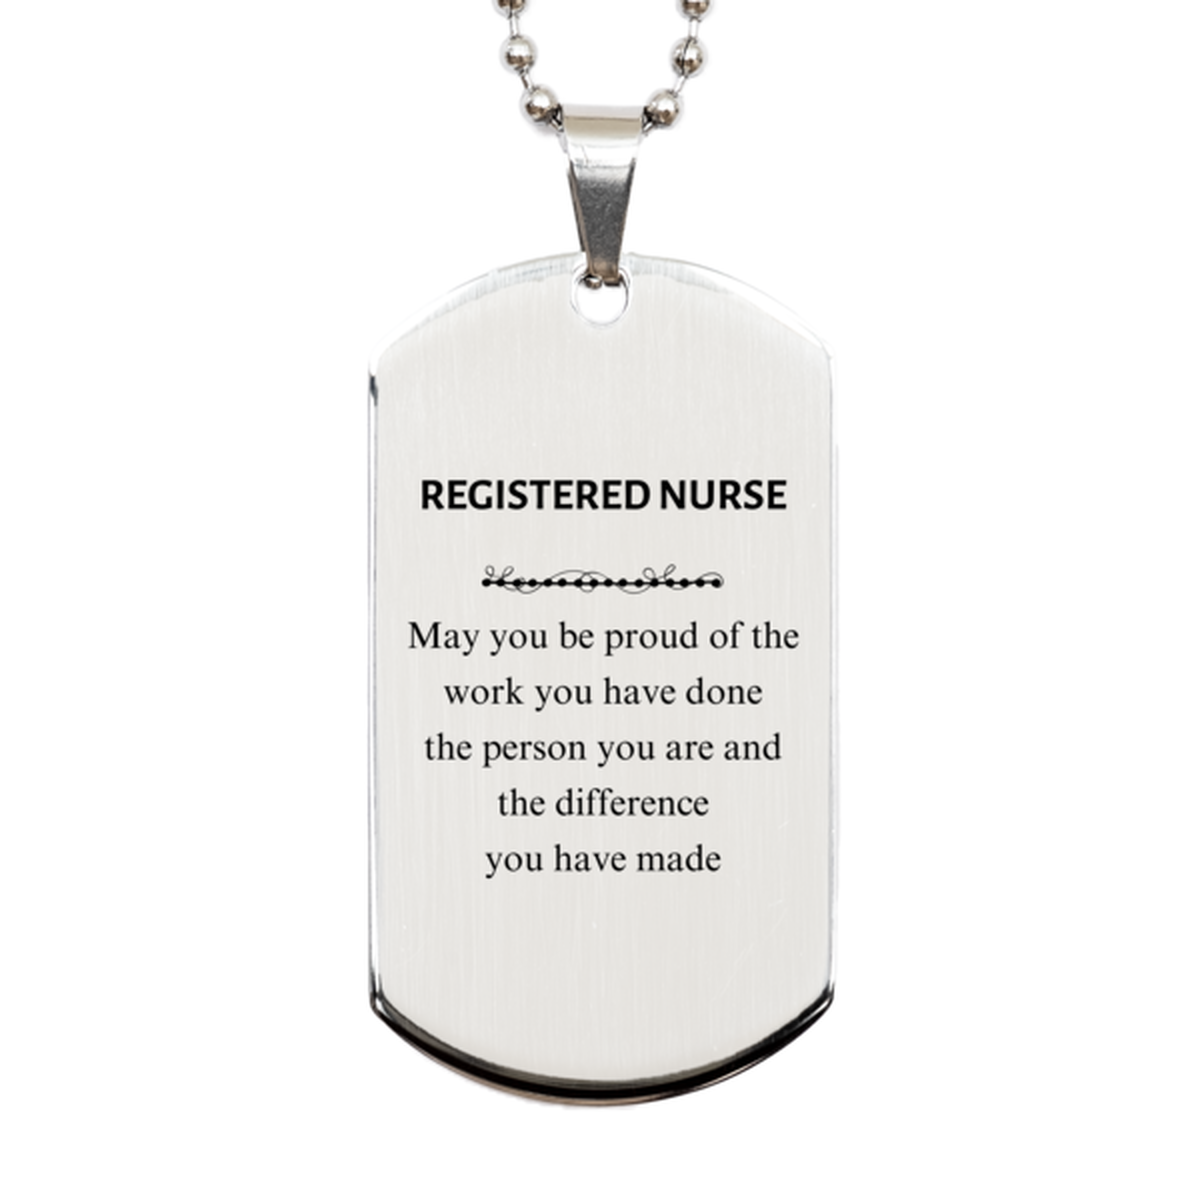 Registered Nurse May you be proud of the work you have done, Retirement Registered Nurse Silver Dog Tag for Colleague Appreciation Gifts Amazing for Registered Nurse